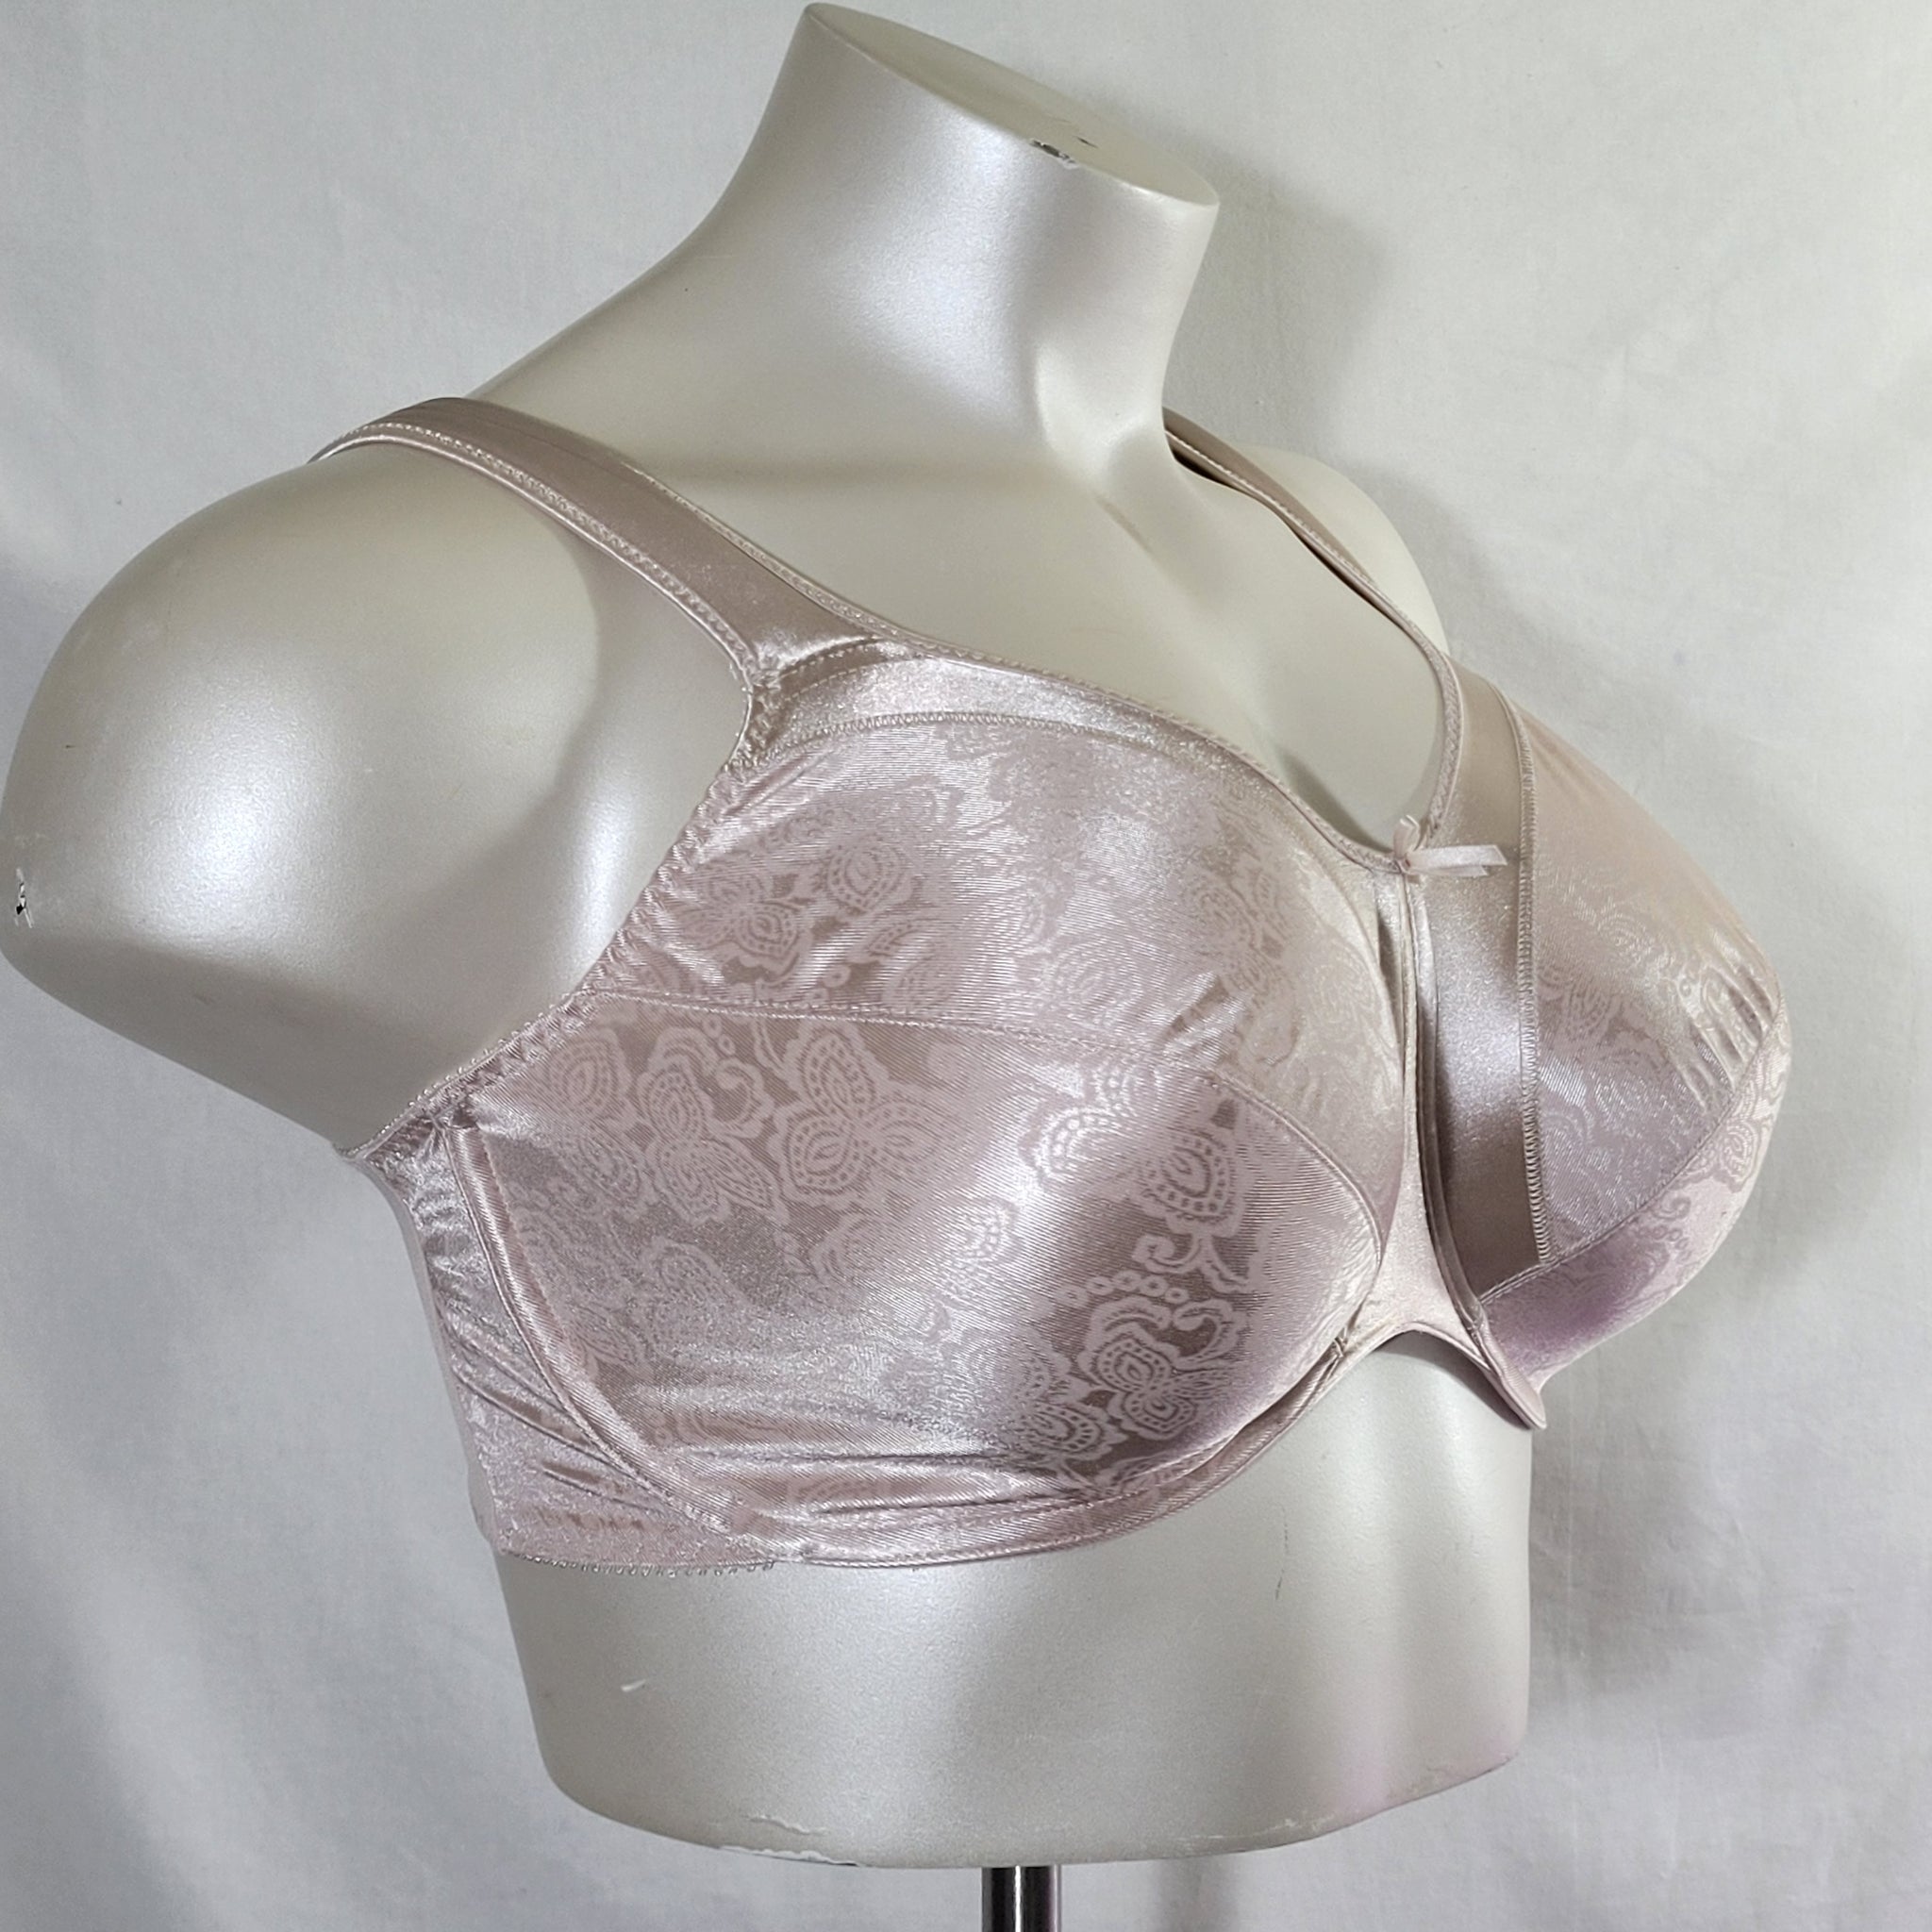 Bali 3562 Satin Tracings Underwire Bra 36D Nude NEW WITH